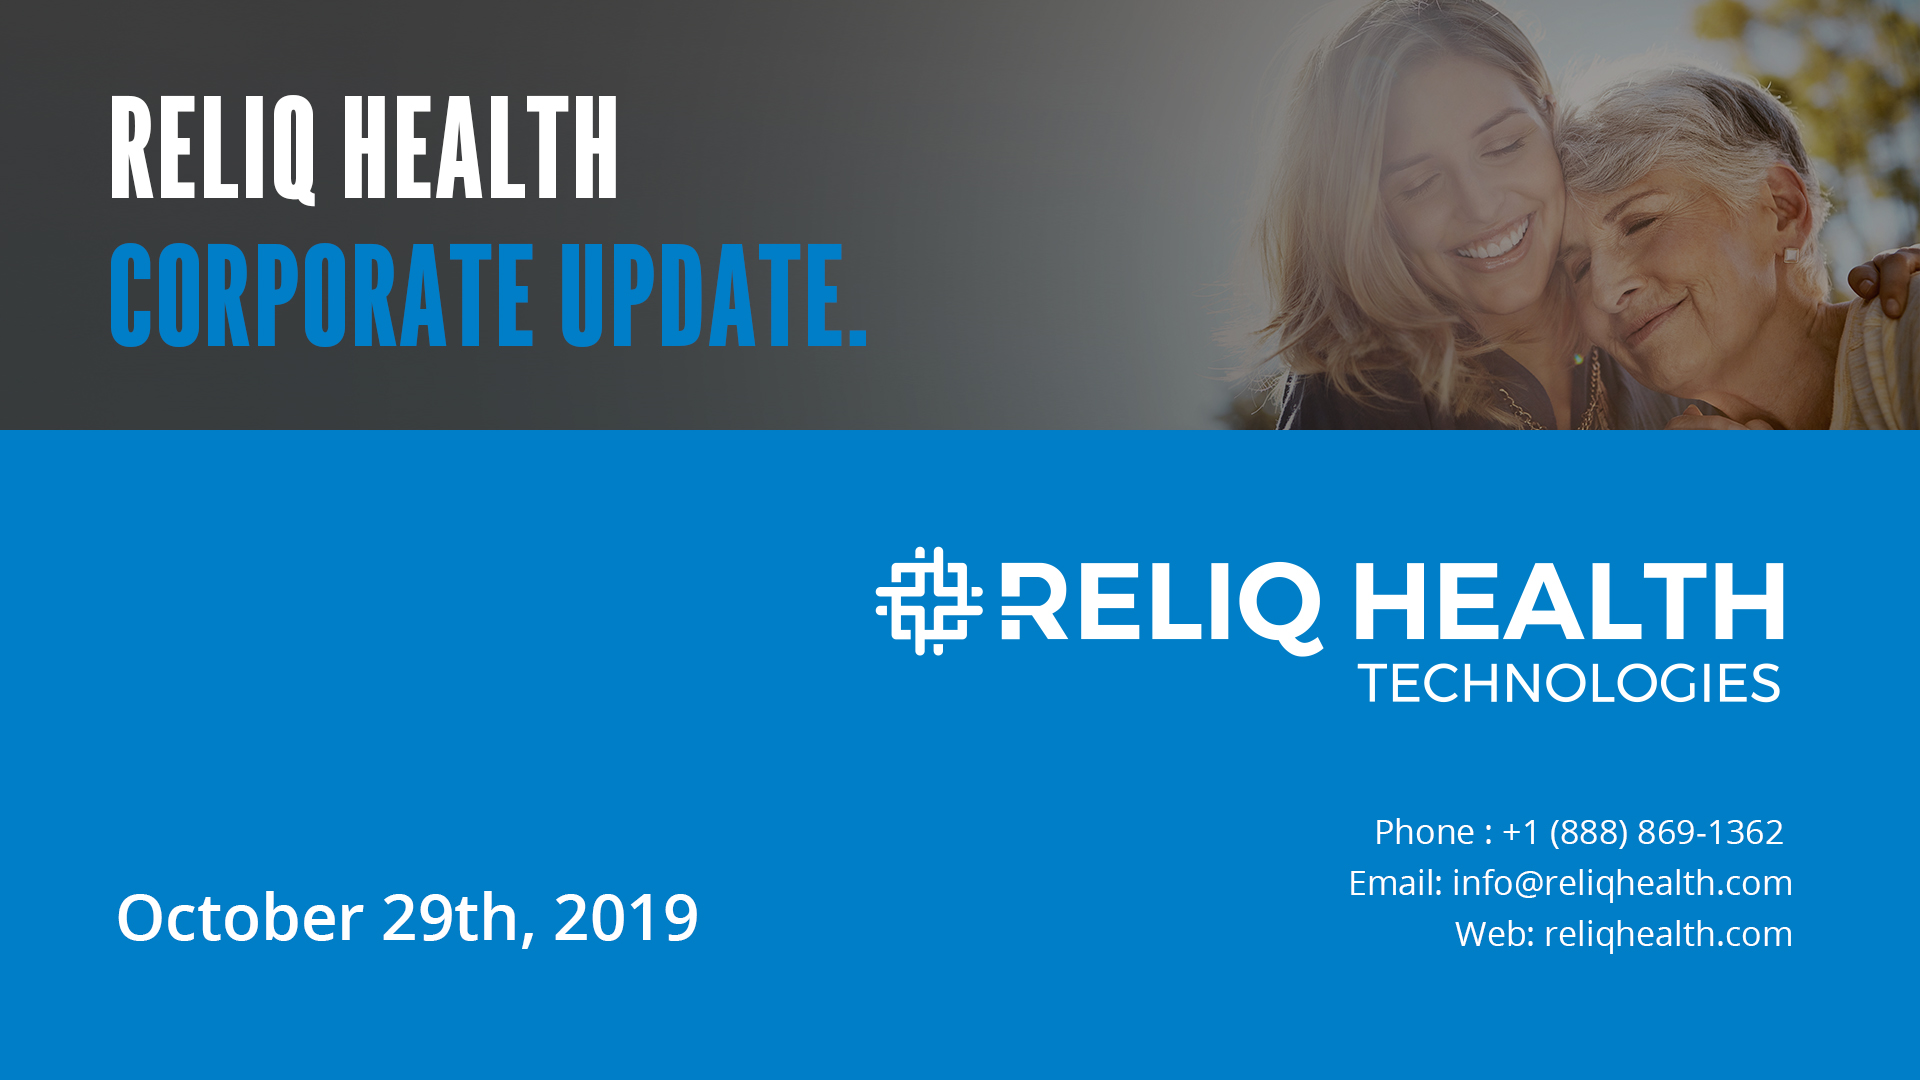 Video Preview for Reliq Health Corporate Update dated October 29th 2019